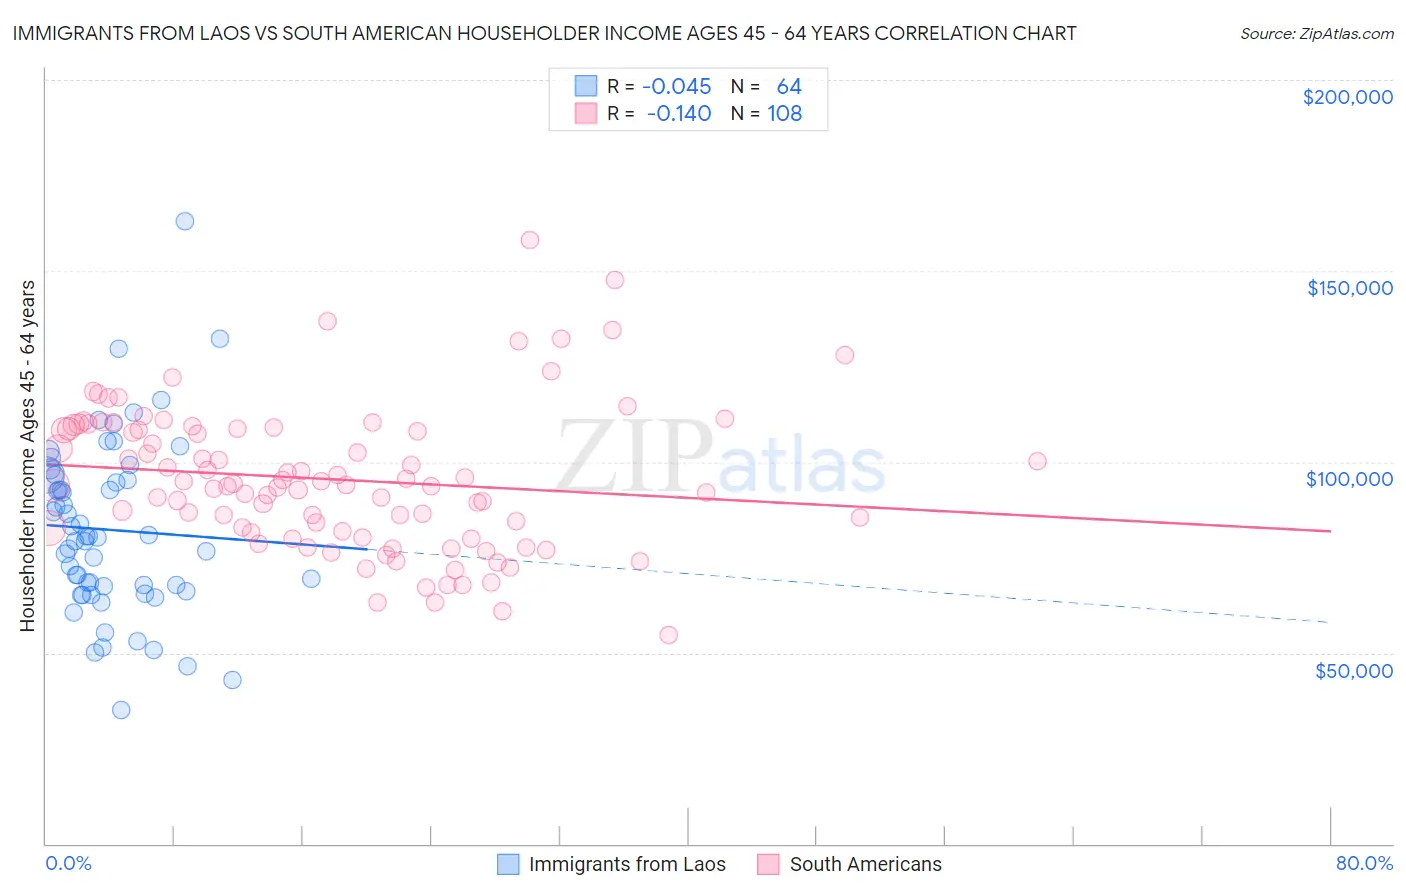 Immigrants from Laos vs South American Householder Income Ages 45 - 64 years